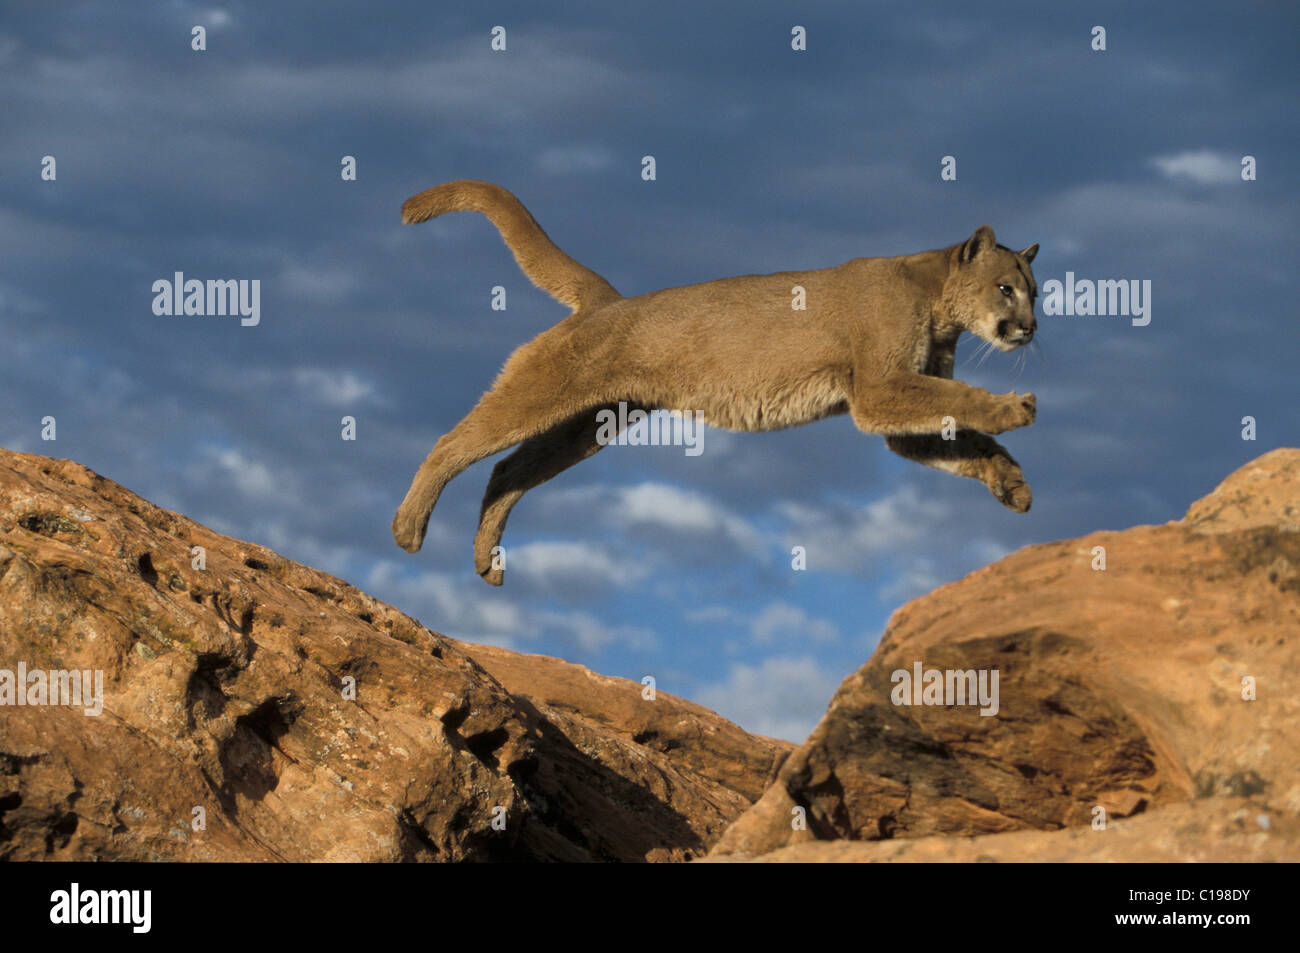 Young Cougar or Puma (Puma concolor) leaping between rocks, Montana, USA,  North America Stock Photo - Alamy